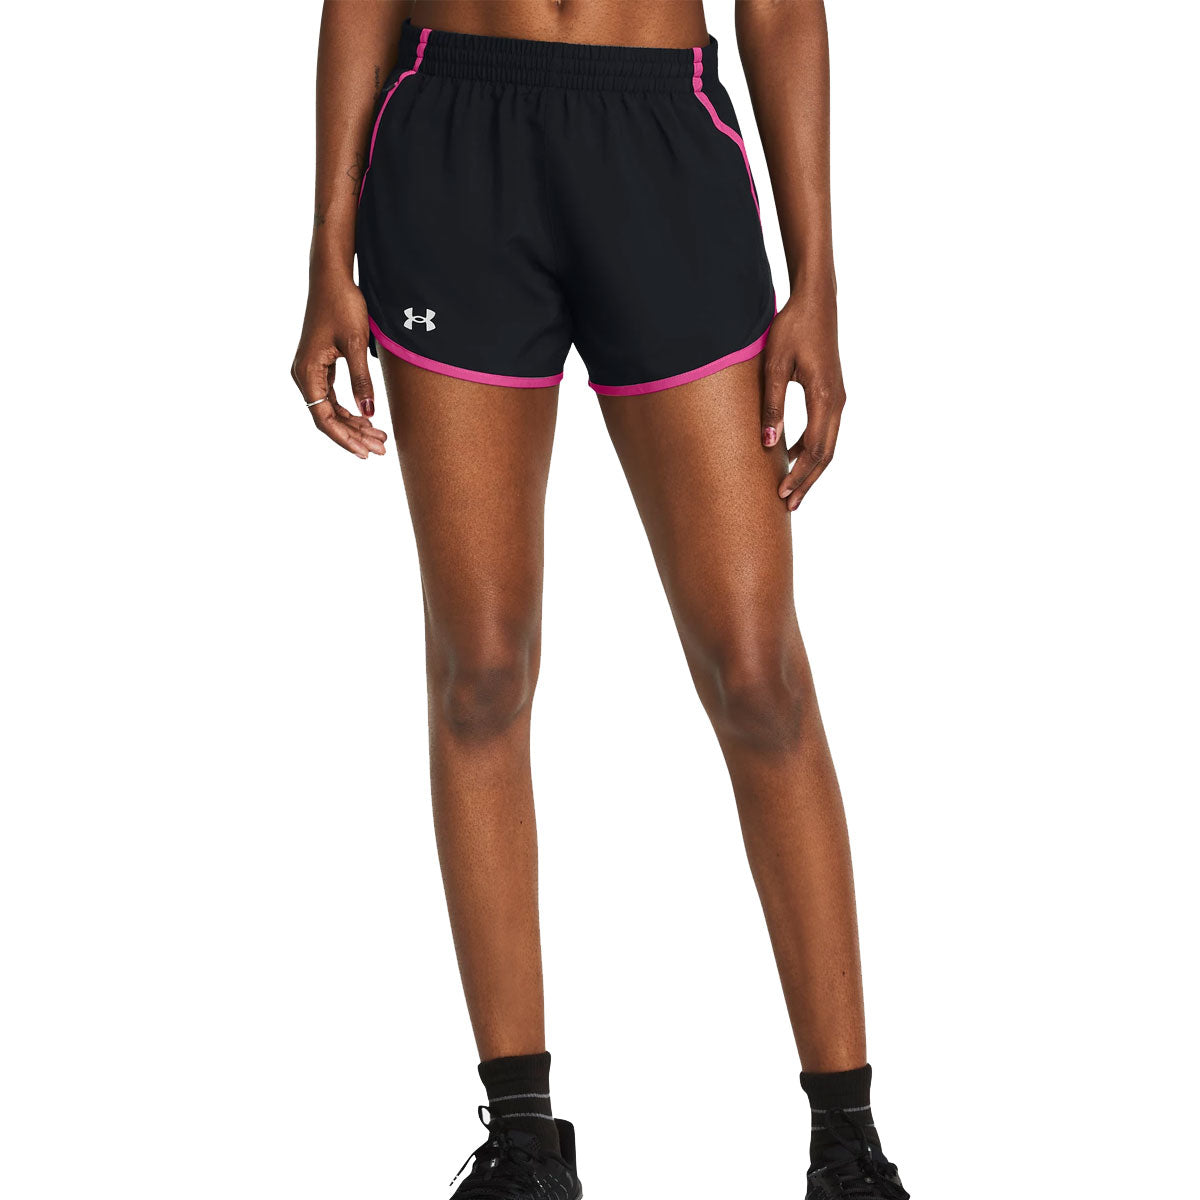 Under Armour Fly By Running Shorts - Womens - Black/Astro Pink/Reflective